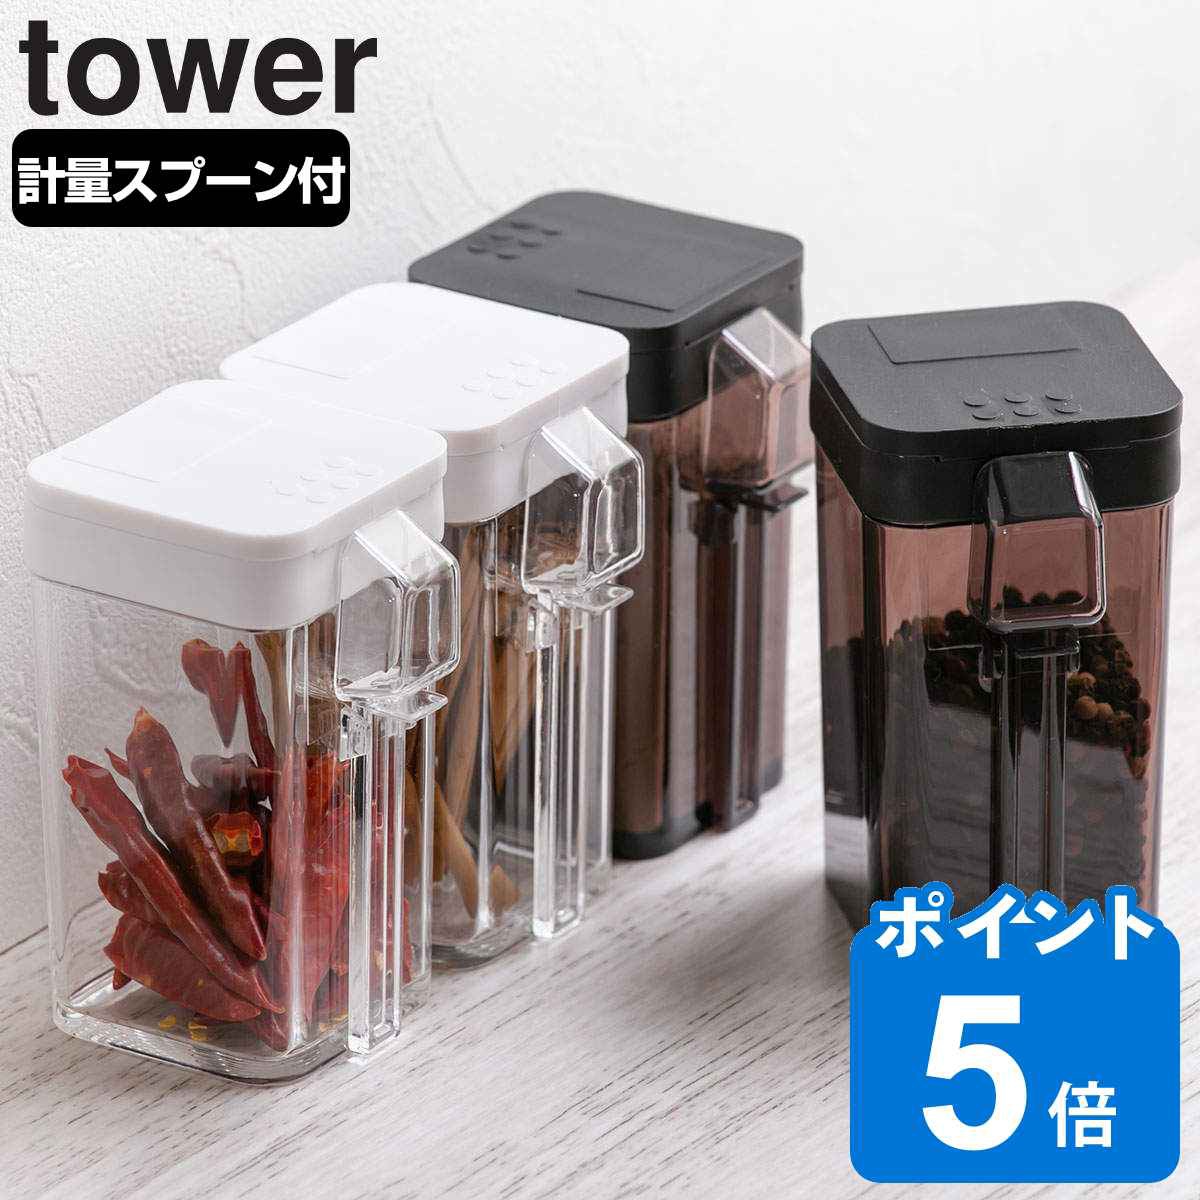 tower XpCX{g ^[